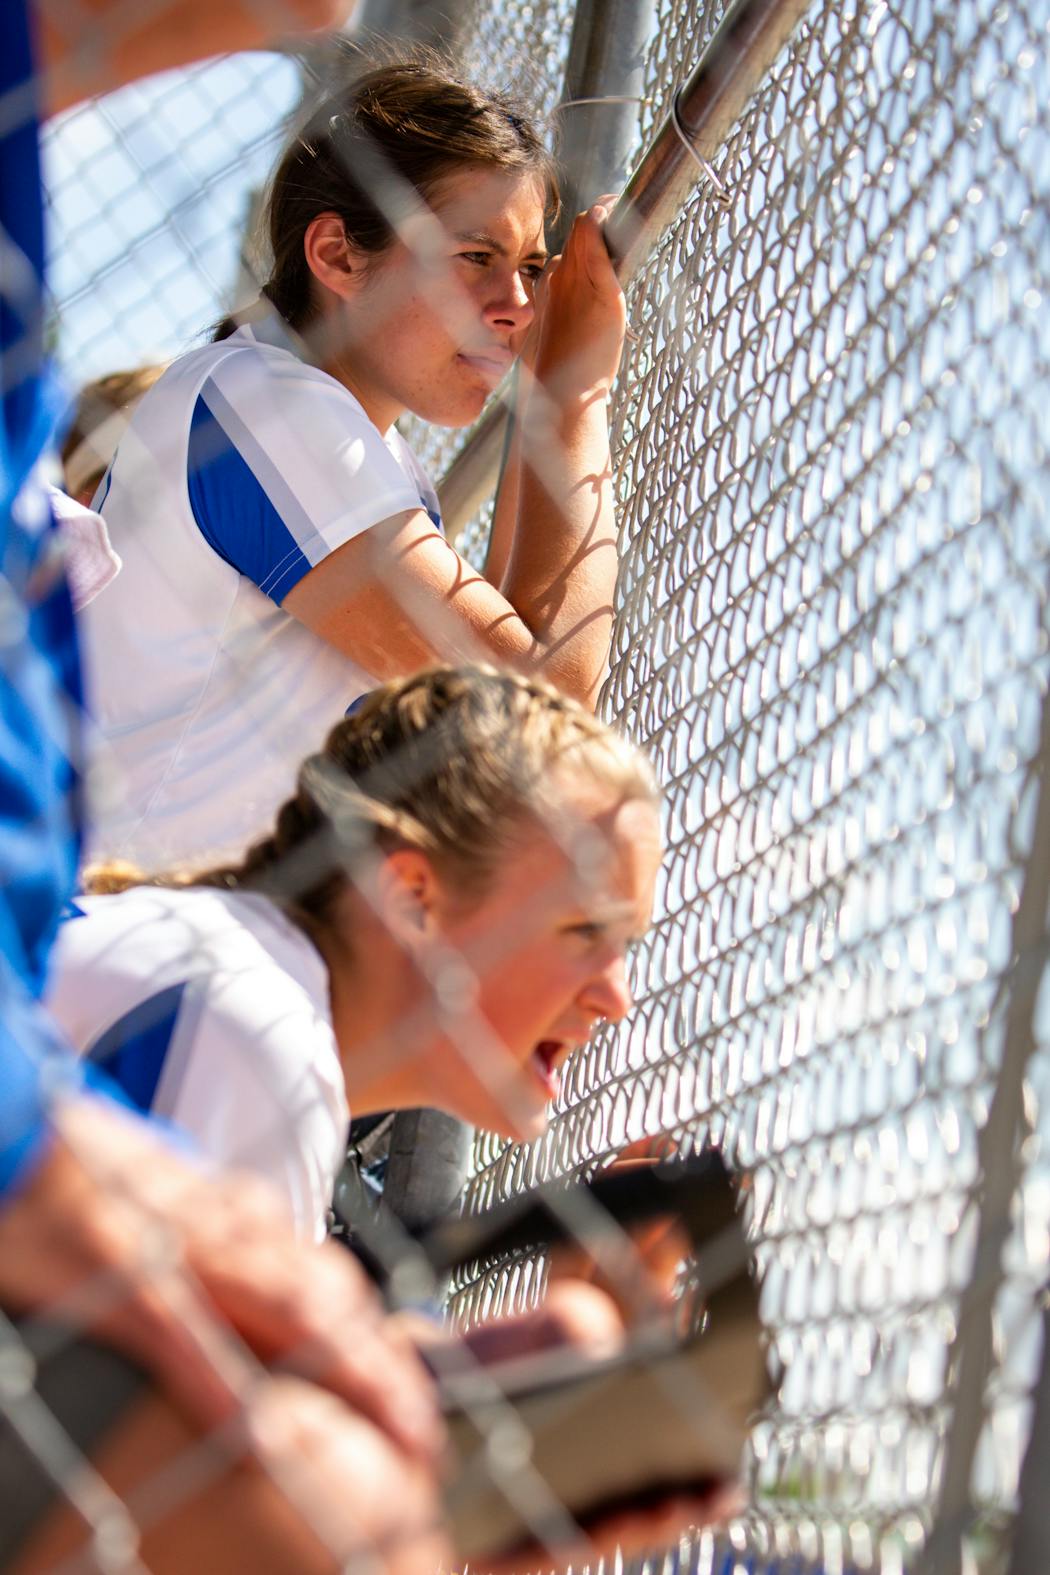 Brainerd softball players hollered their support from the dugout during the softball state championships June 10 at Caswell Park in North Mankato.